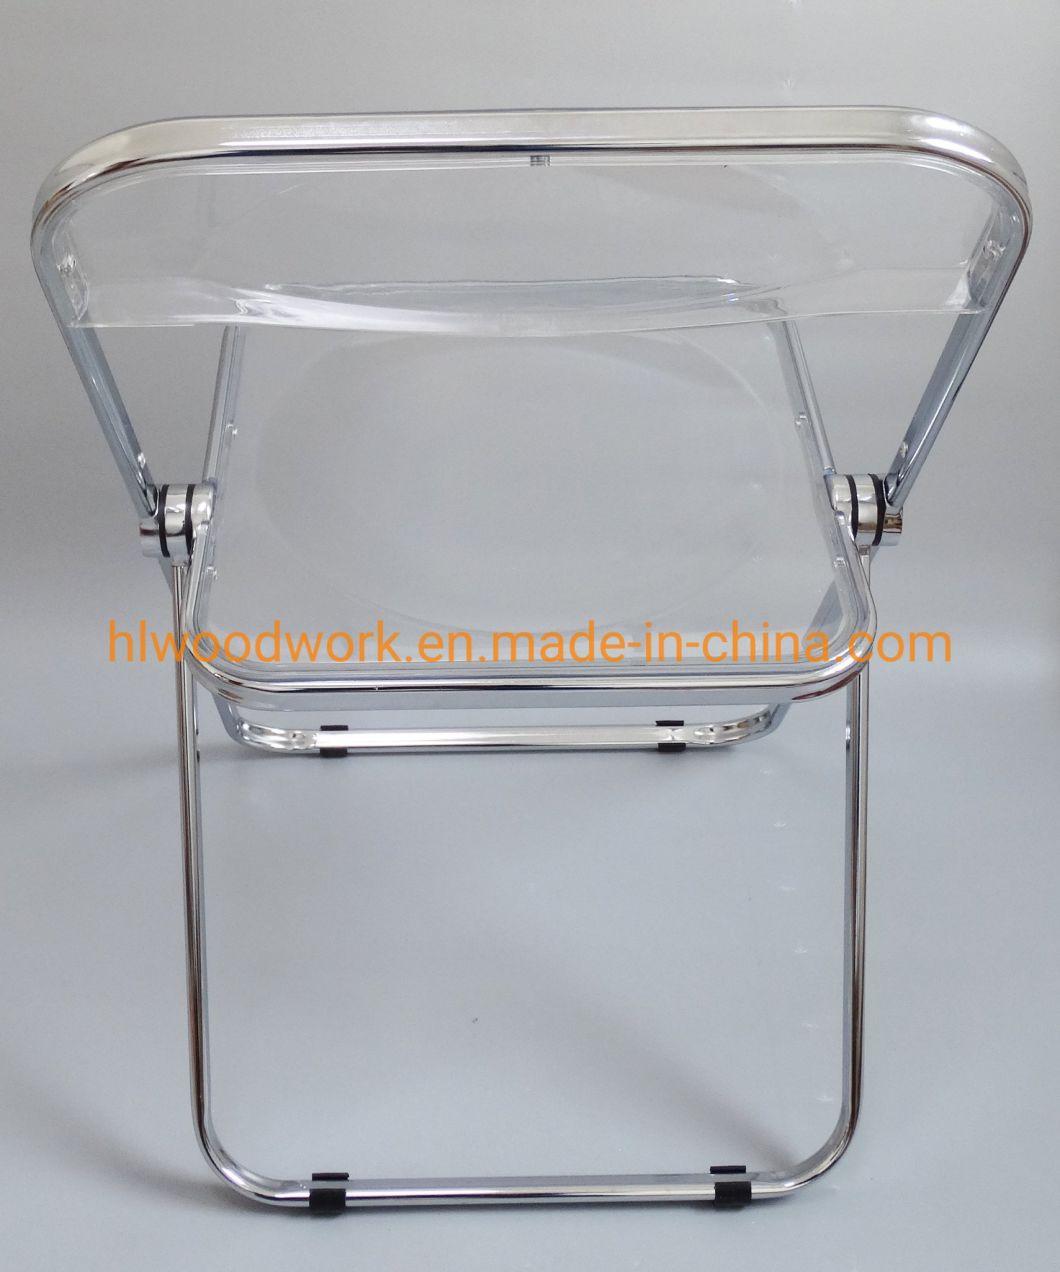 Modern Transparent Pink Folding Chair PC Plastic Living Room Chair Chrome Frame Office Bar Dining Leisure Banquet Wedding Meeting Chair Plastic Dining Chair